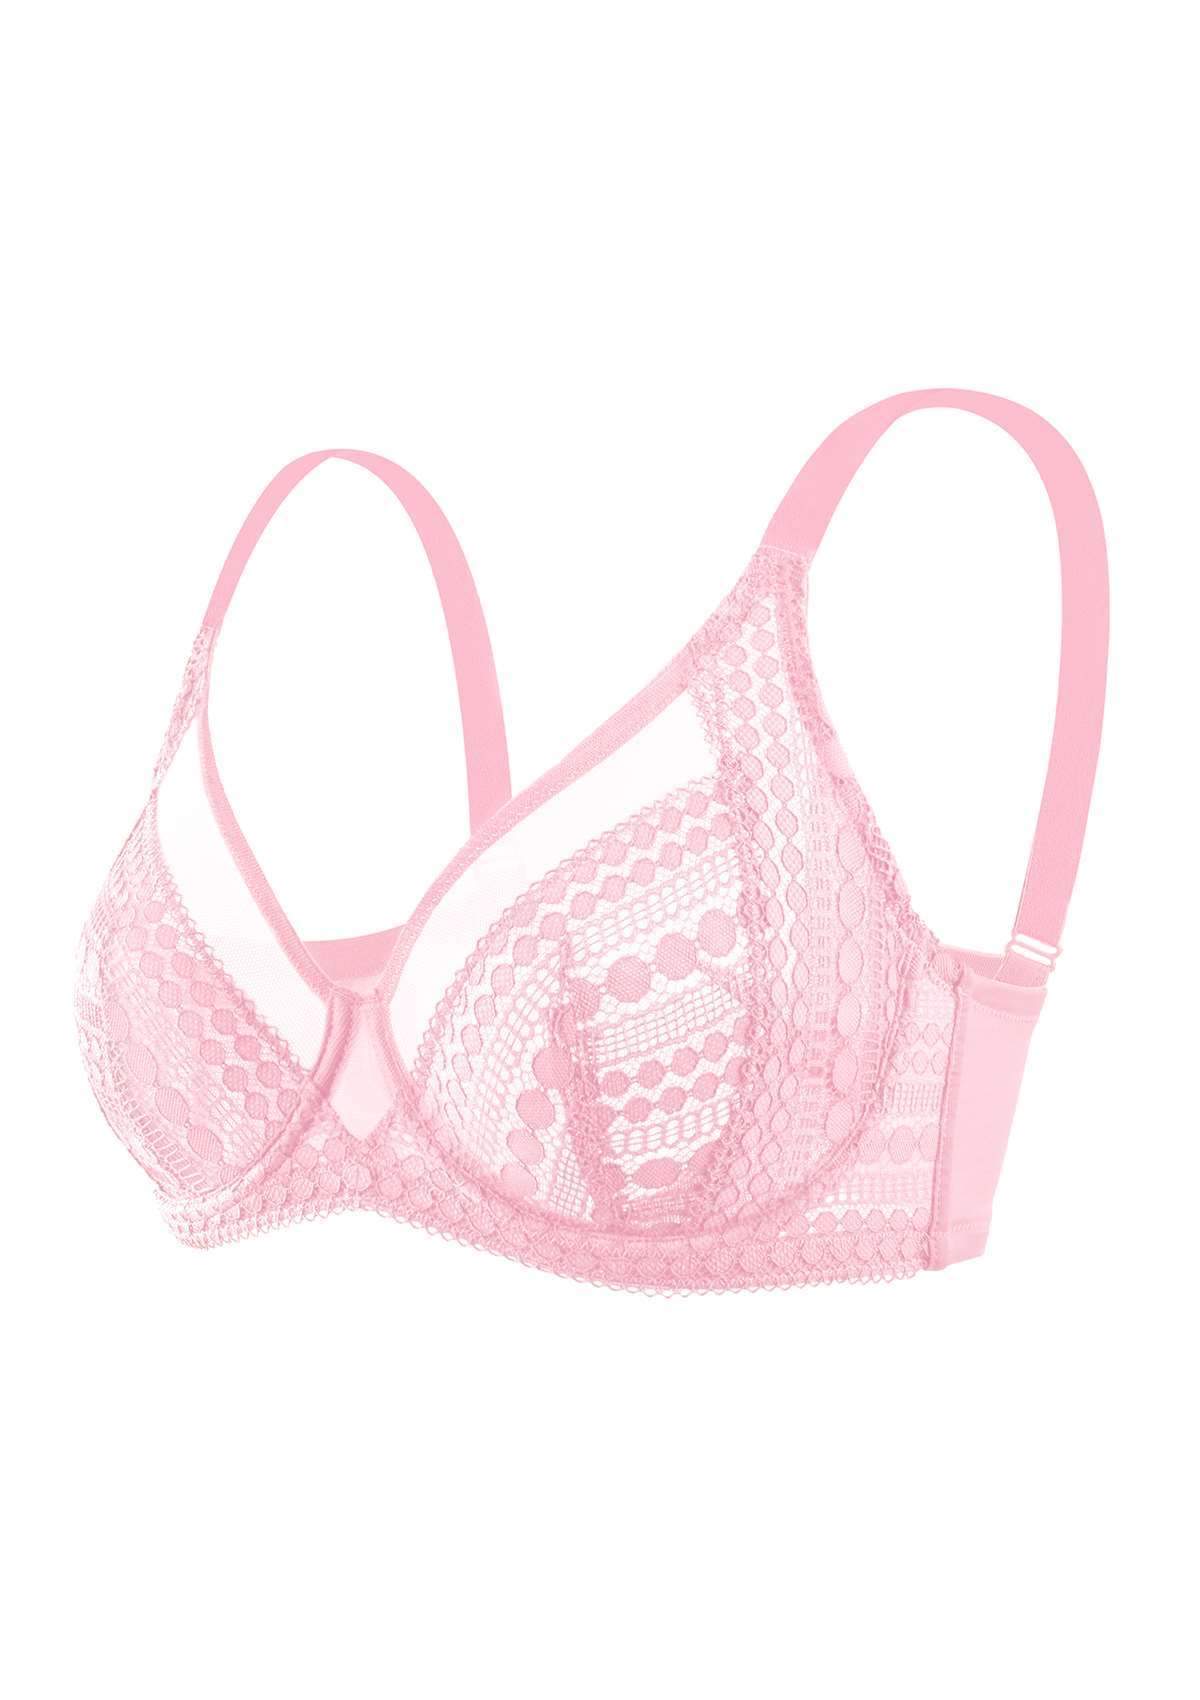 HSIA Heroine Lace Bra And Panties Set: Most Comfortable Supportive Bra - Pink / 36 / C